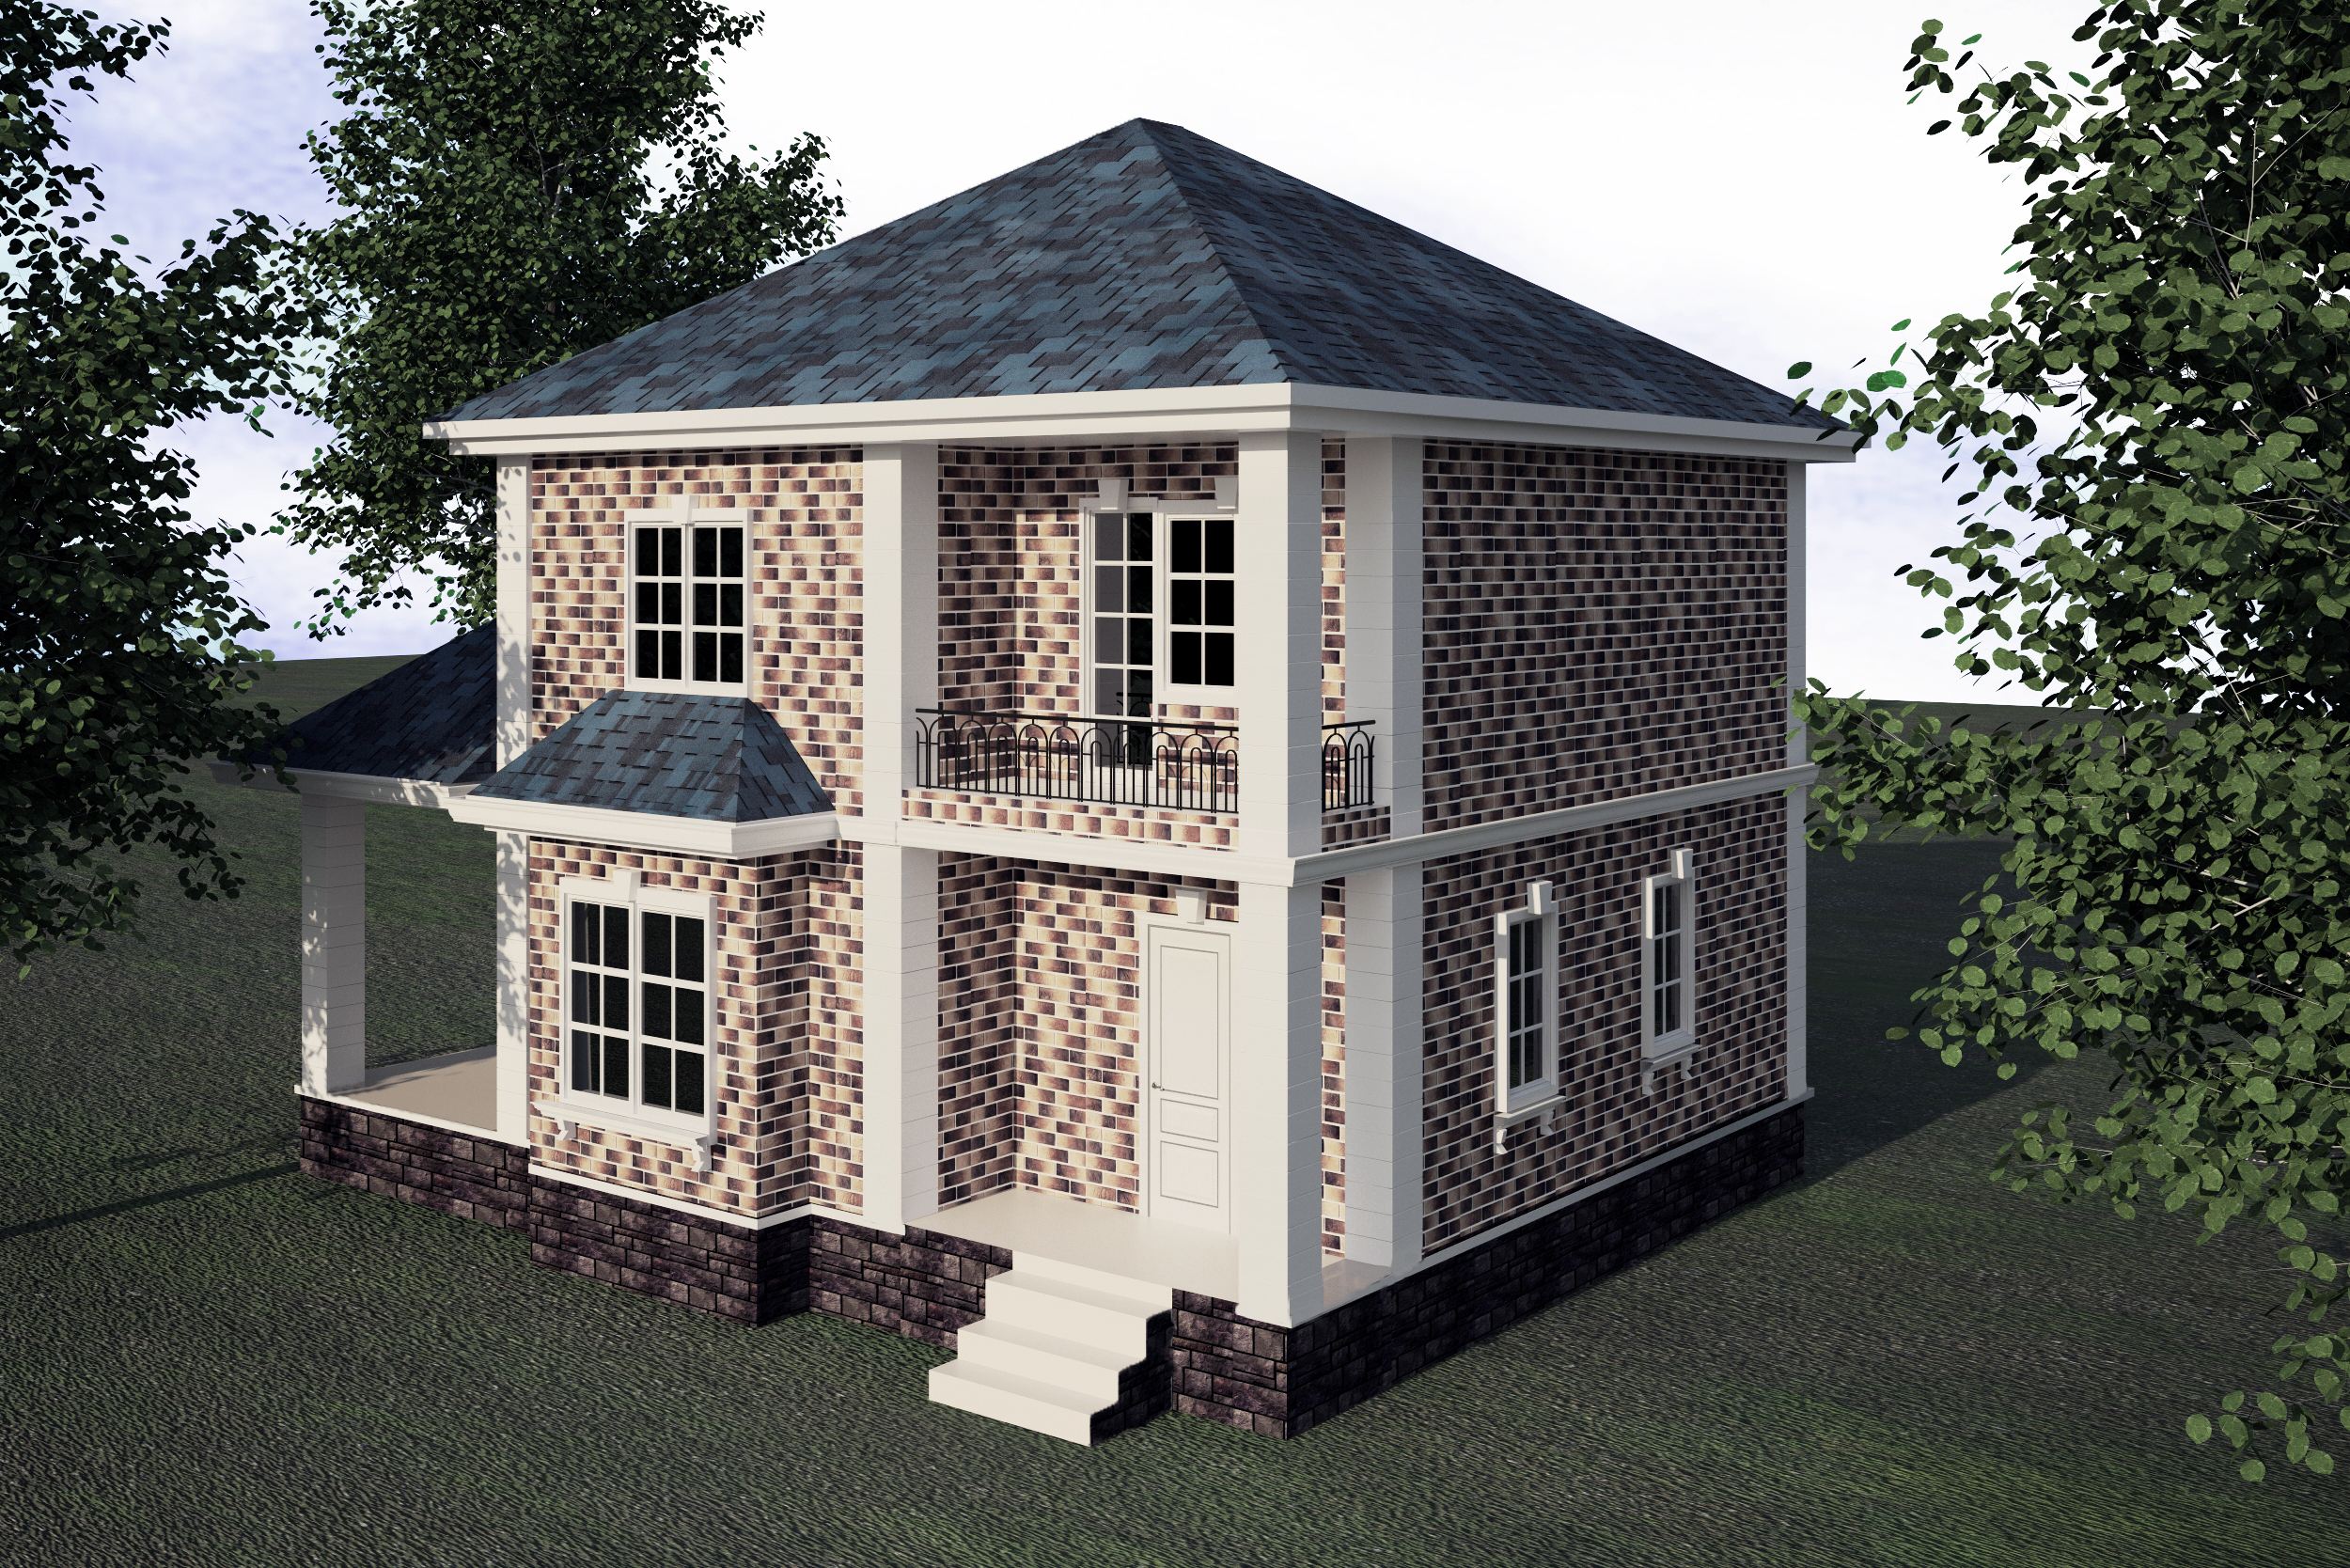 Two-storey house in 3d max vray 3.0 image